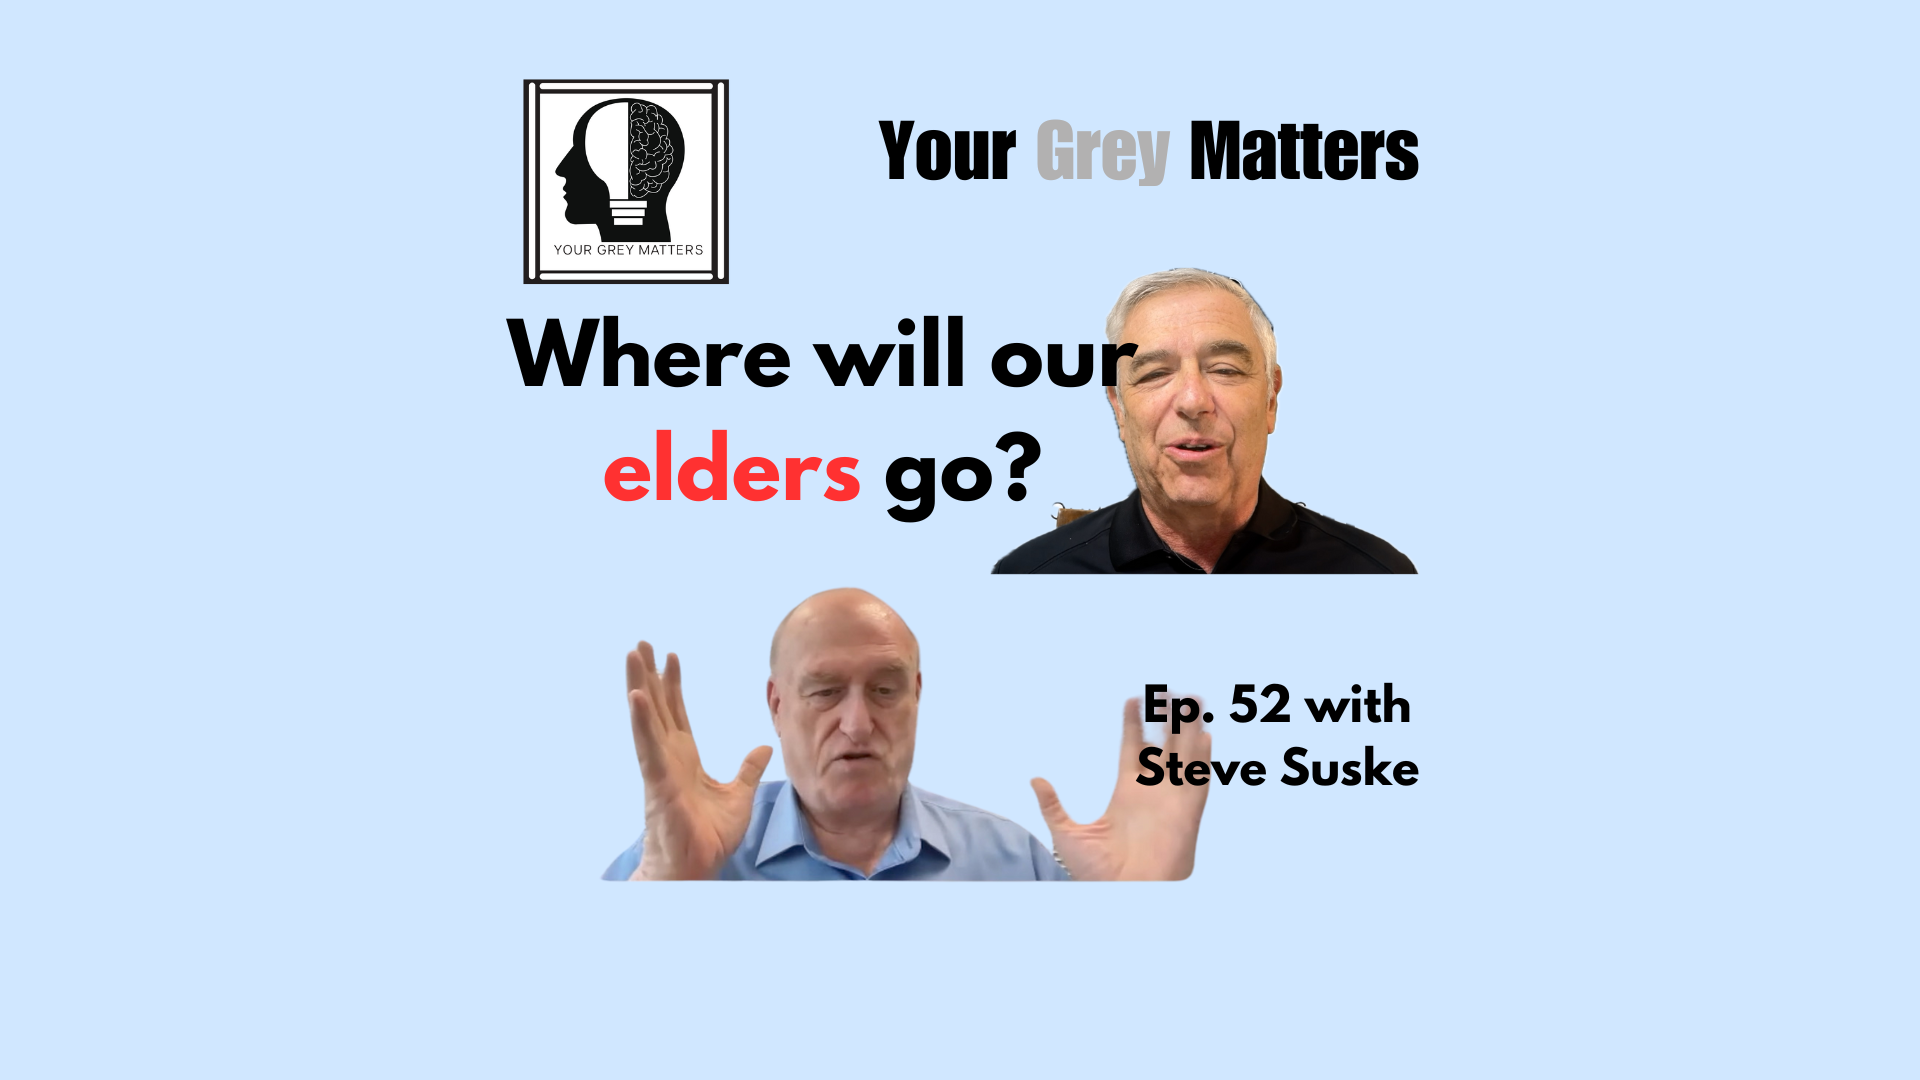 Two men, one gesturing with his hands and the other smiling, with the text ‘Where will our elders go?’ and ‘Ep. 52 with Steve Suske’ on a blue background.